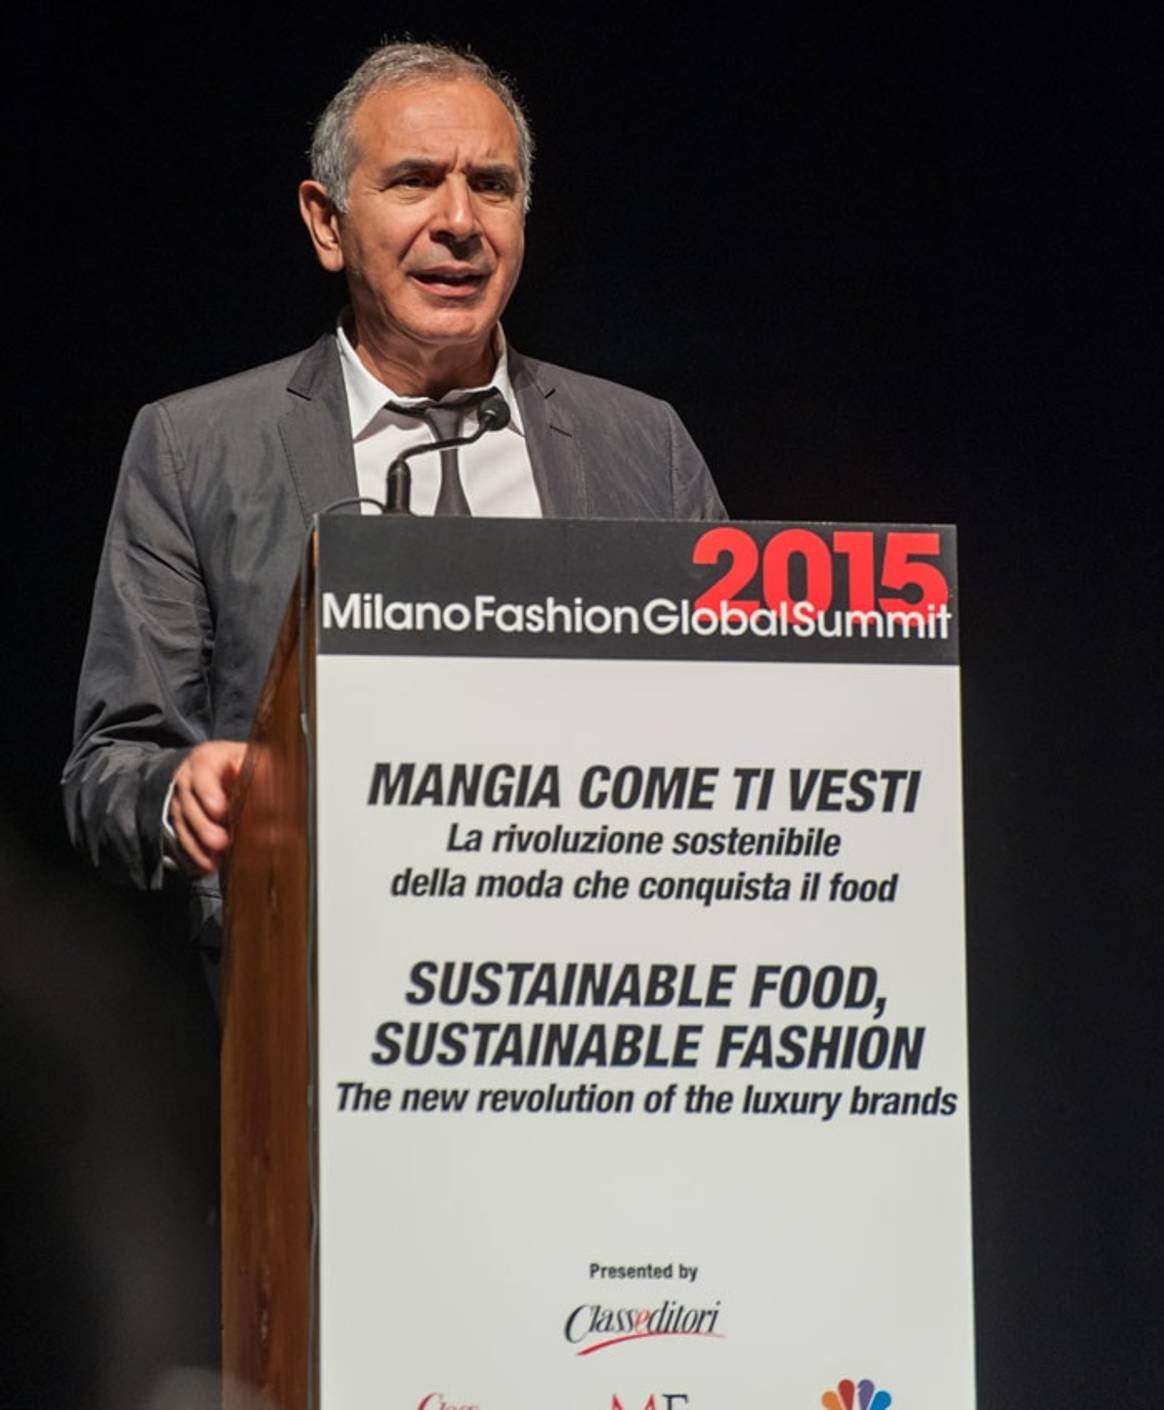 Renzo Rosso: Creating the supply chain for sustainable fashion is very expensive